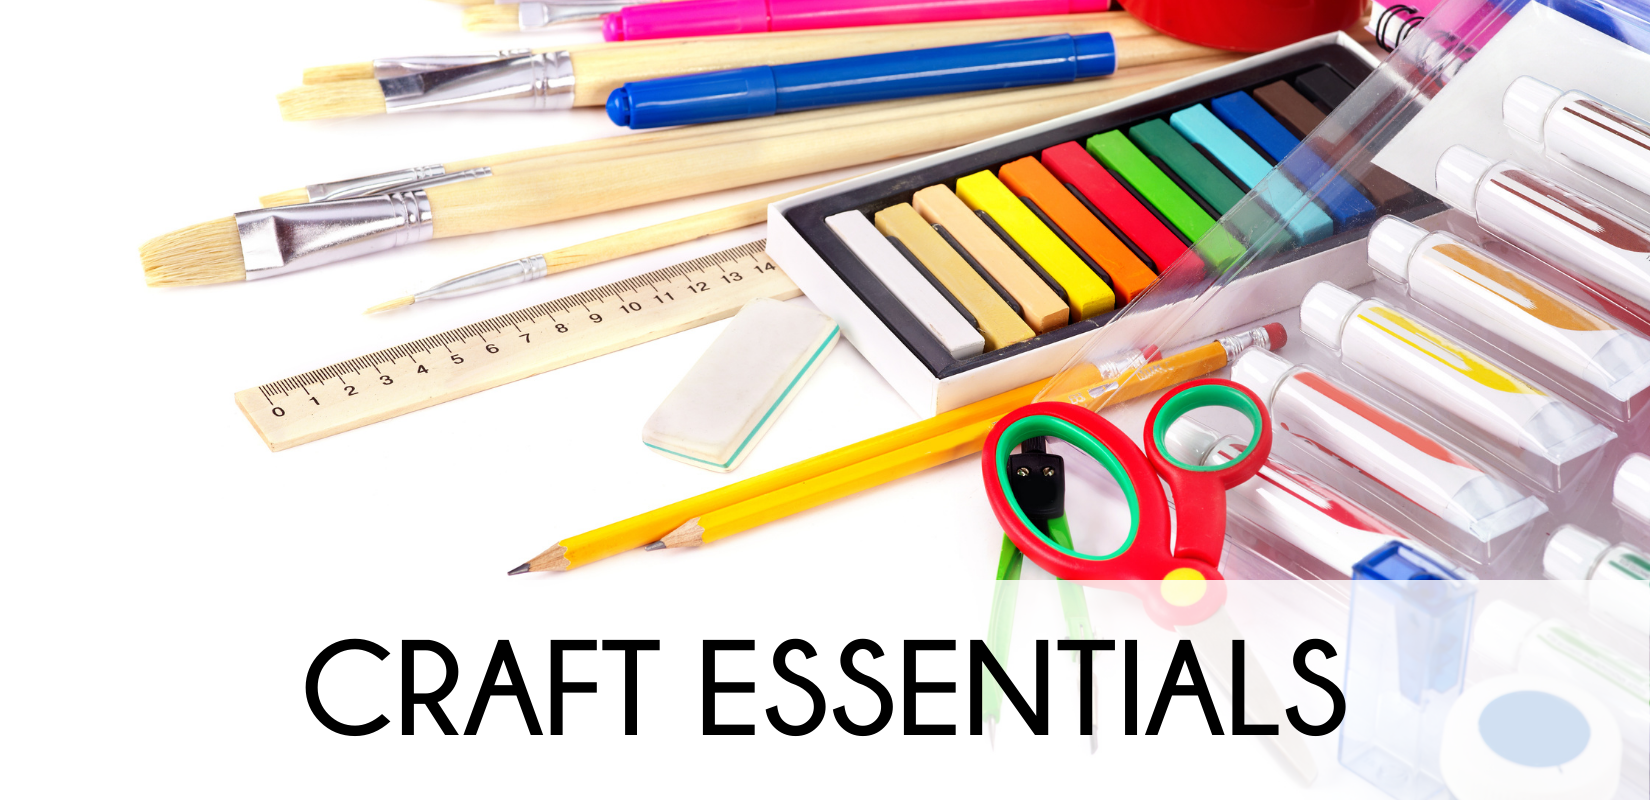 10 Essential Craft Supplies You'll Want to Have in Your Studio